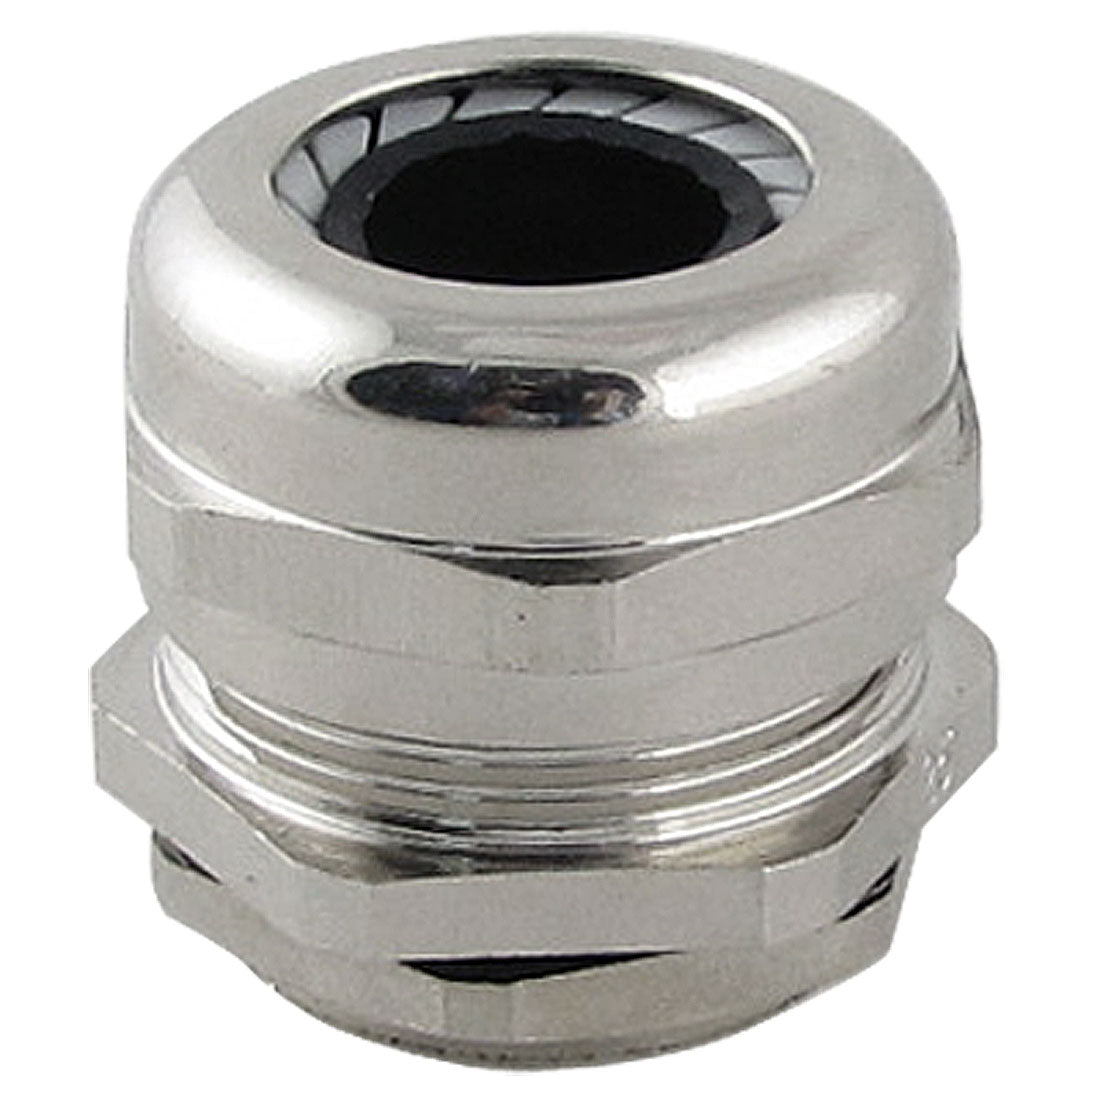 uxcell Uxcell Silver Tone Stainless Steel 10.0-14.0mm M25 Cable Gland with Locknut